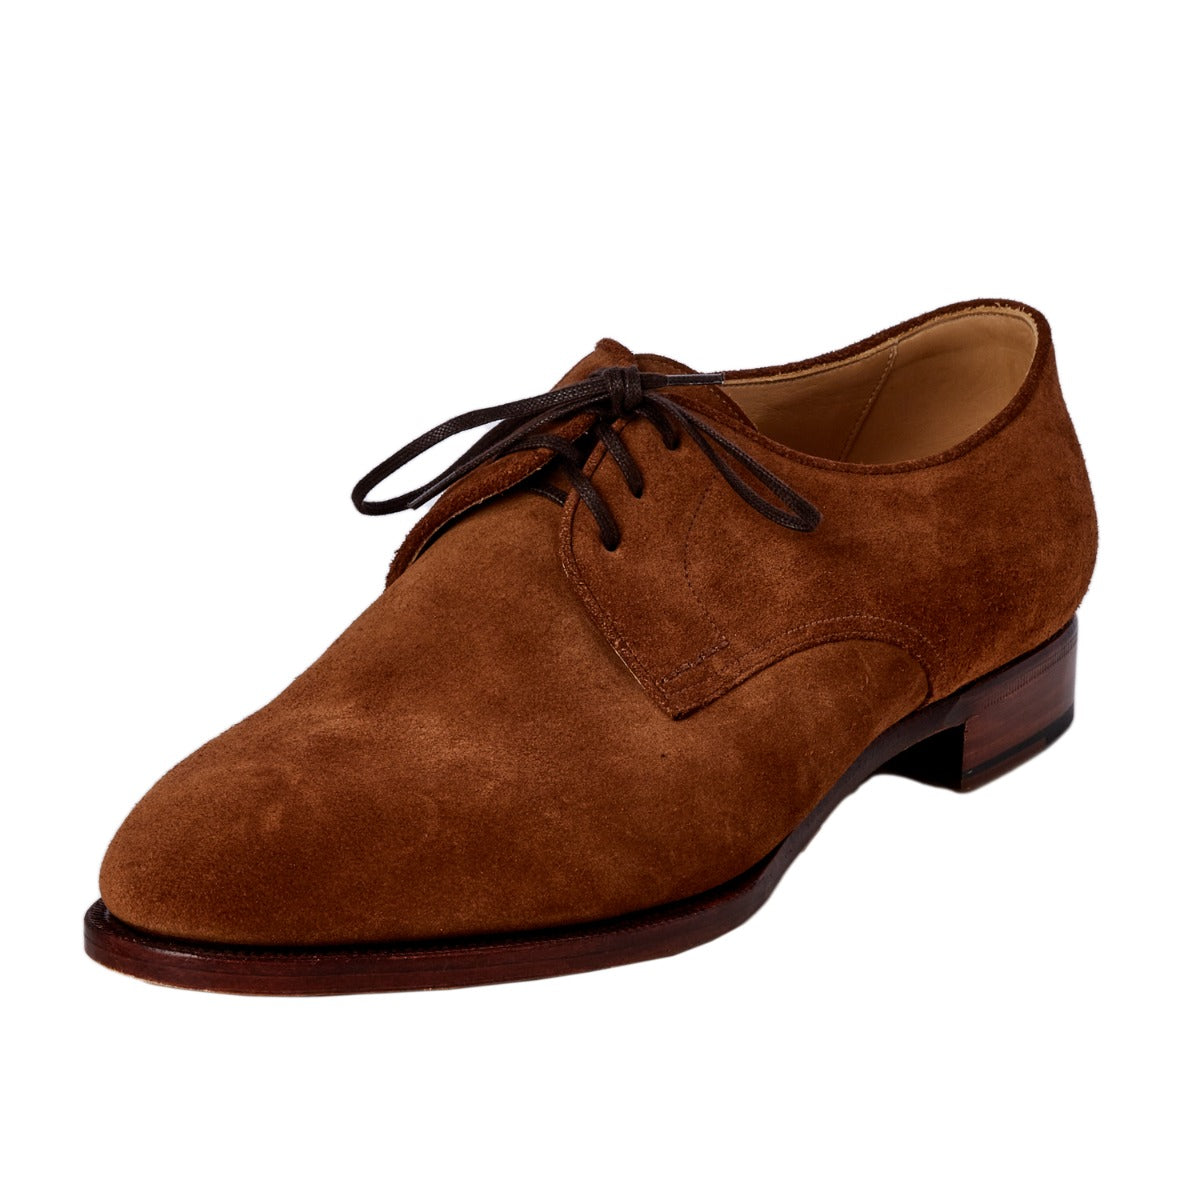 KirbyAllison.com's TLB Medium Brown Derby 8.5UK men's shoe with laces.